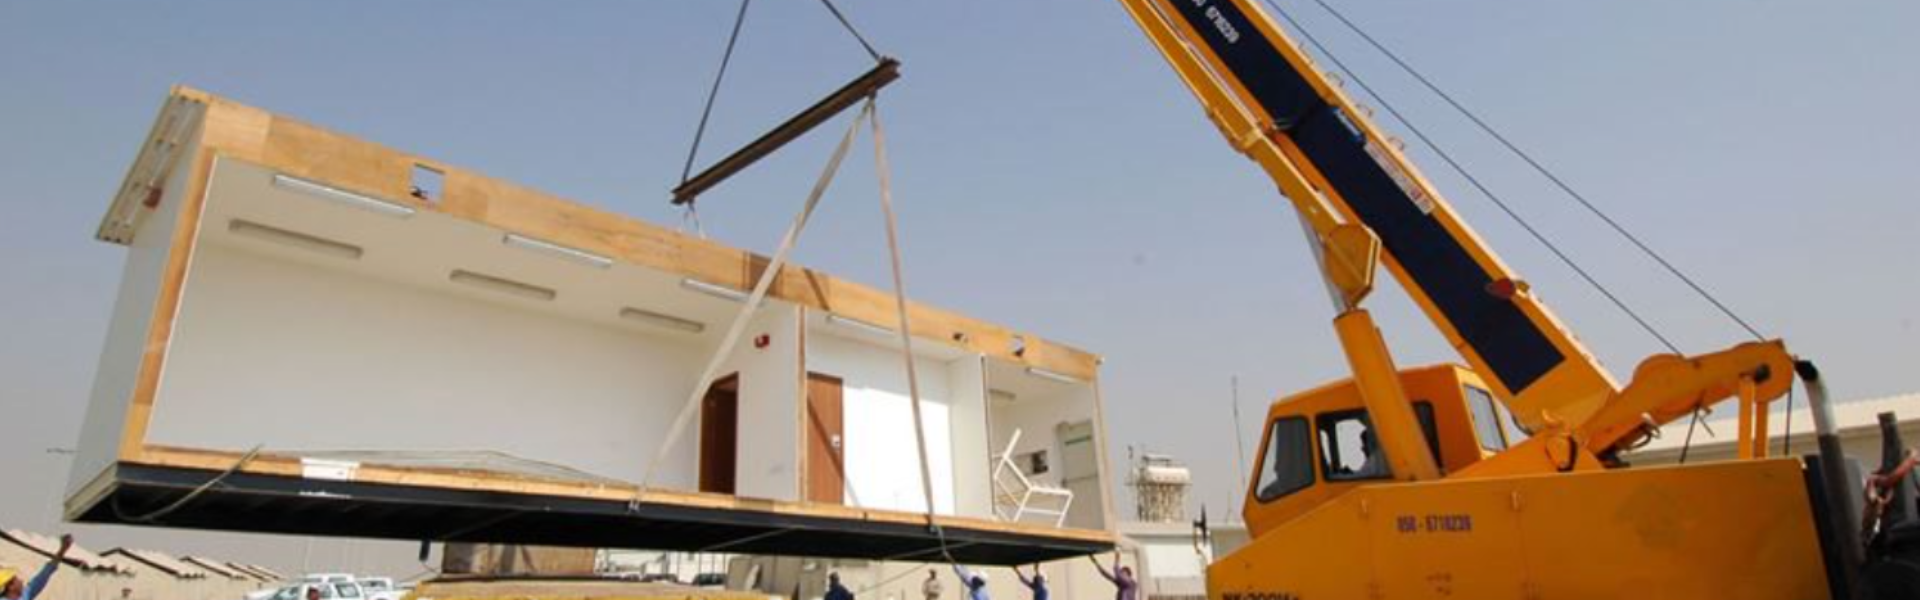 Modular buildings can be two-stories or more with today's building technology.